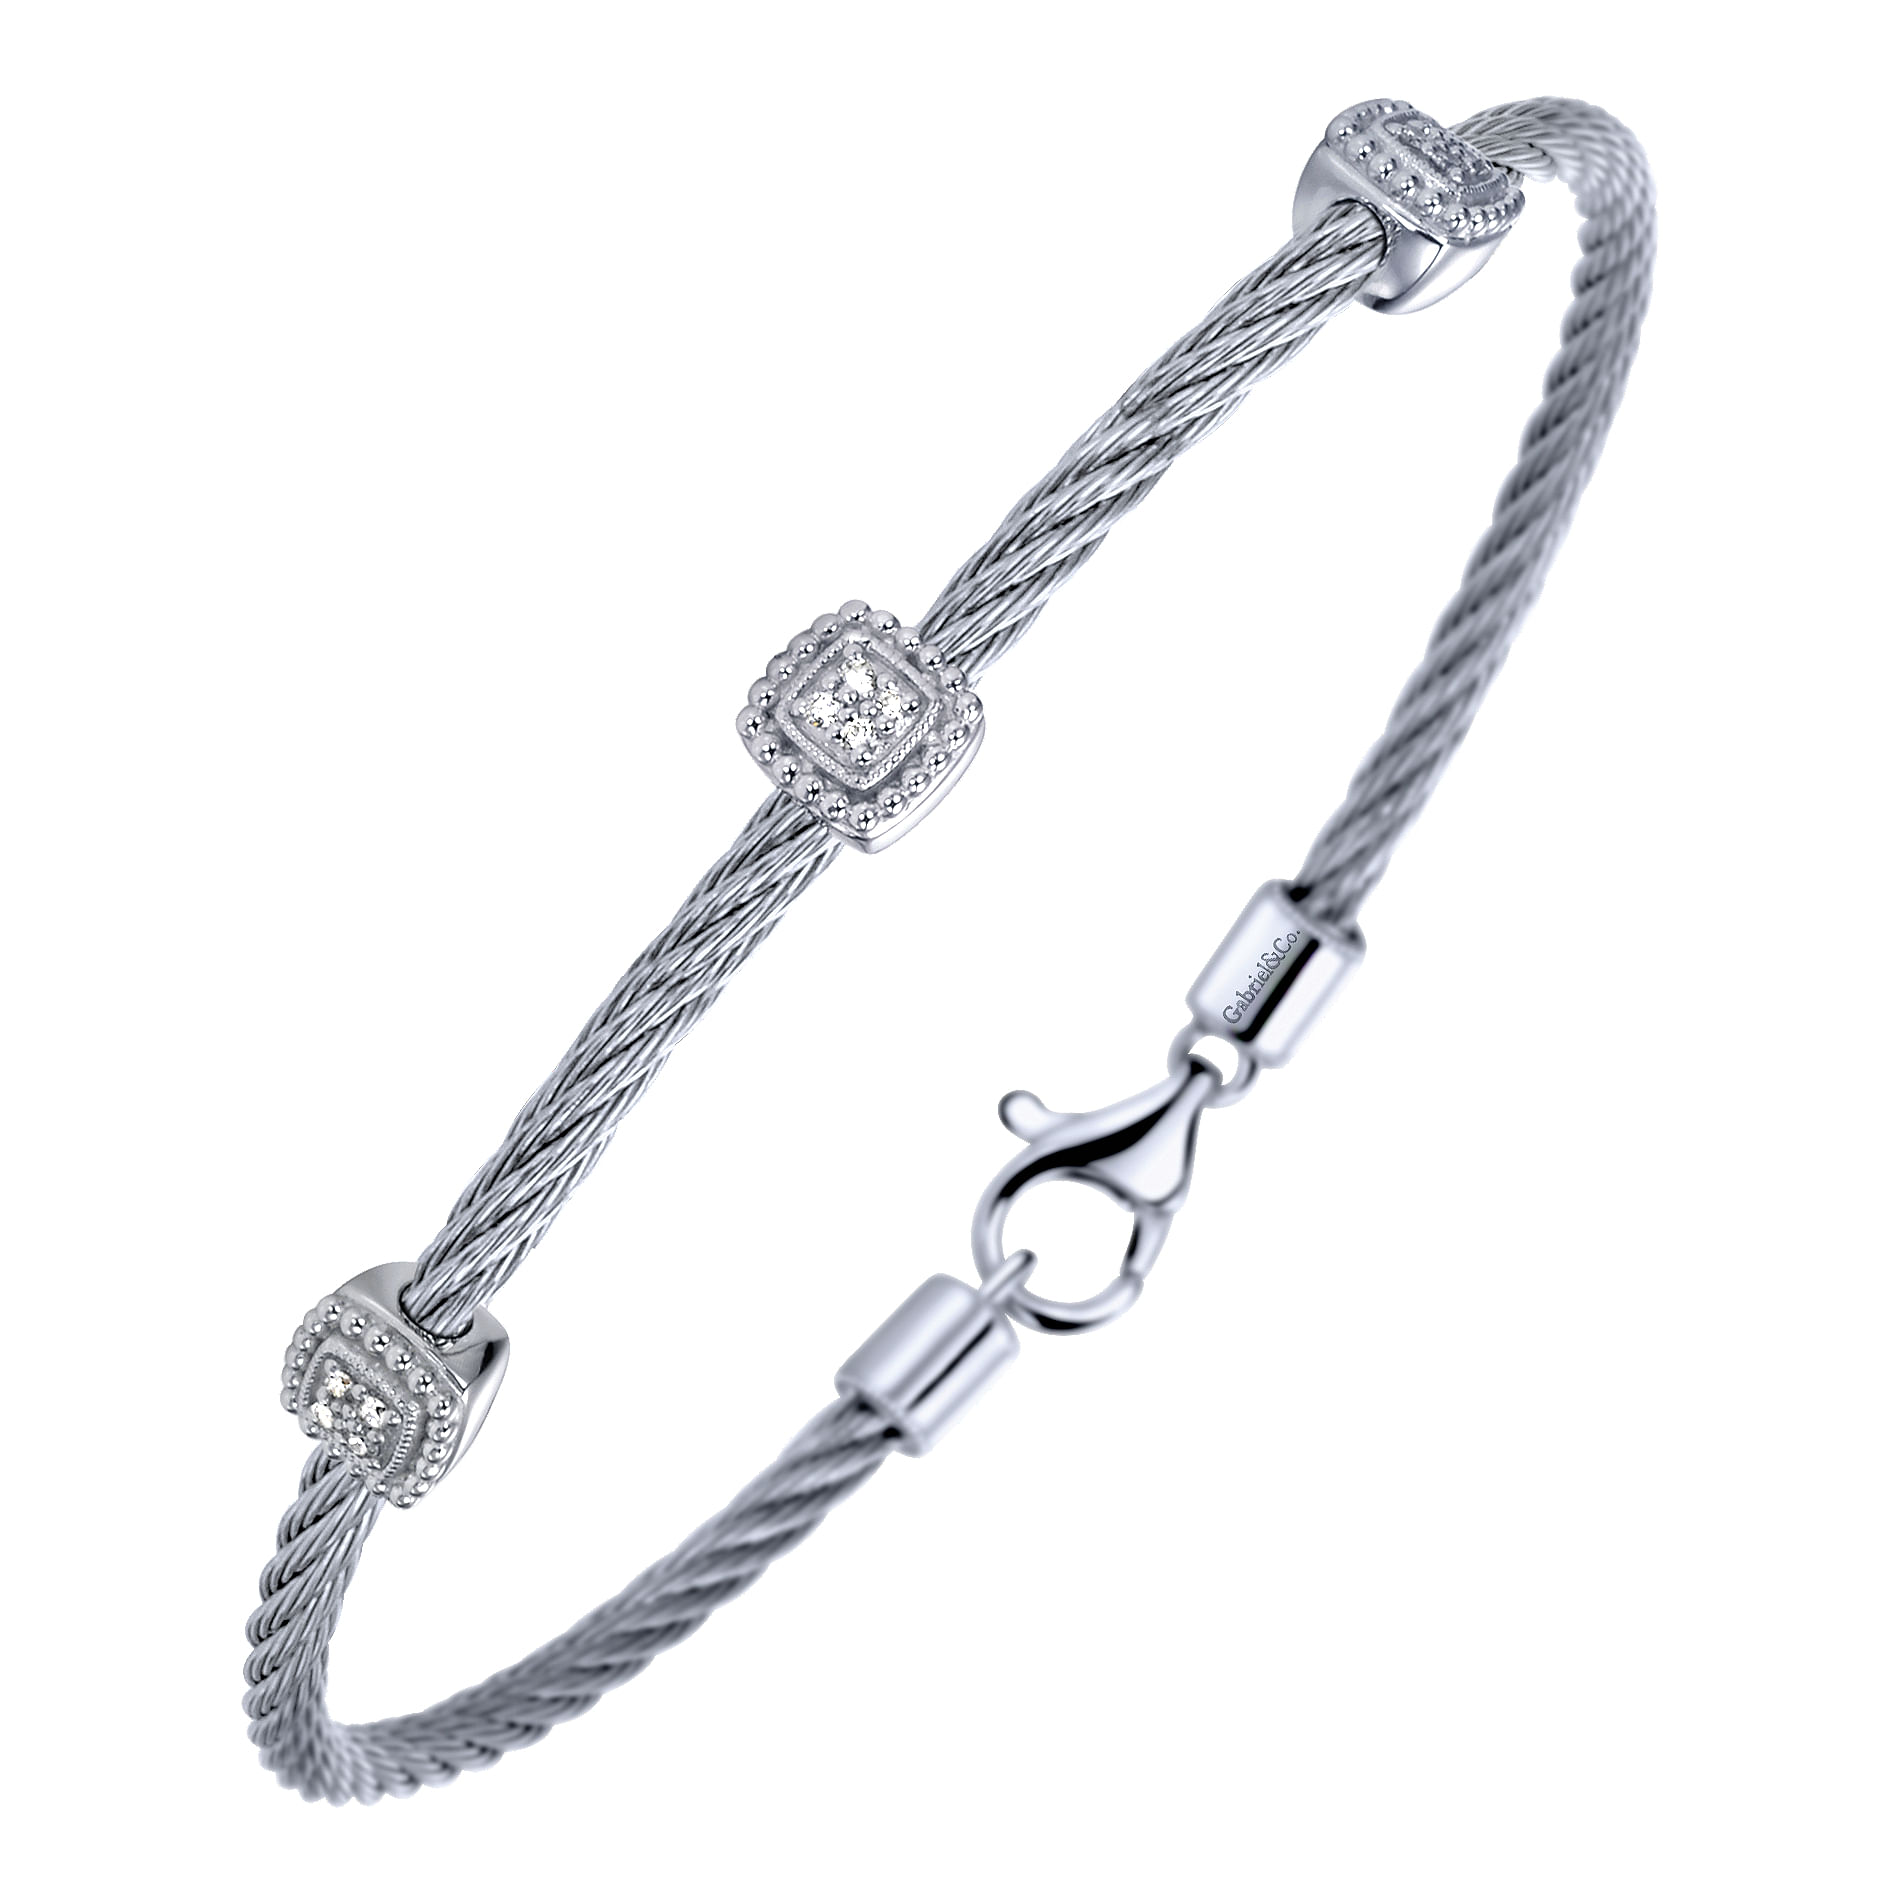 925 Sterling Silver-Stainless Steel Twisted Cable Bangle with 3 Square Cluster Diamond Stations